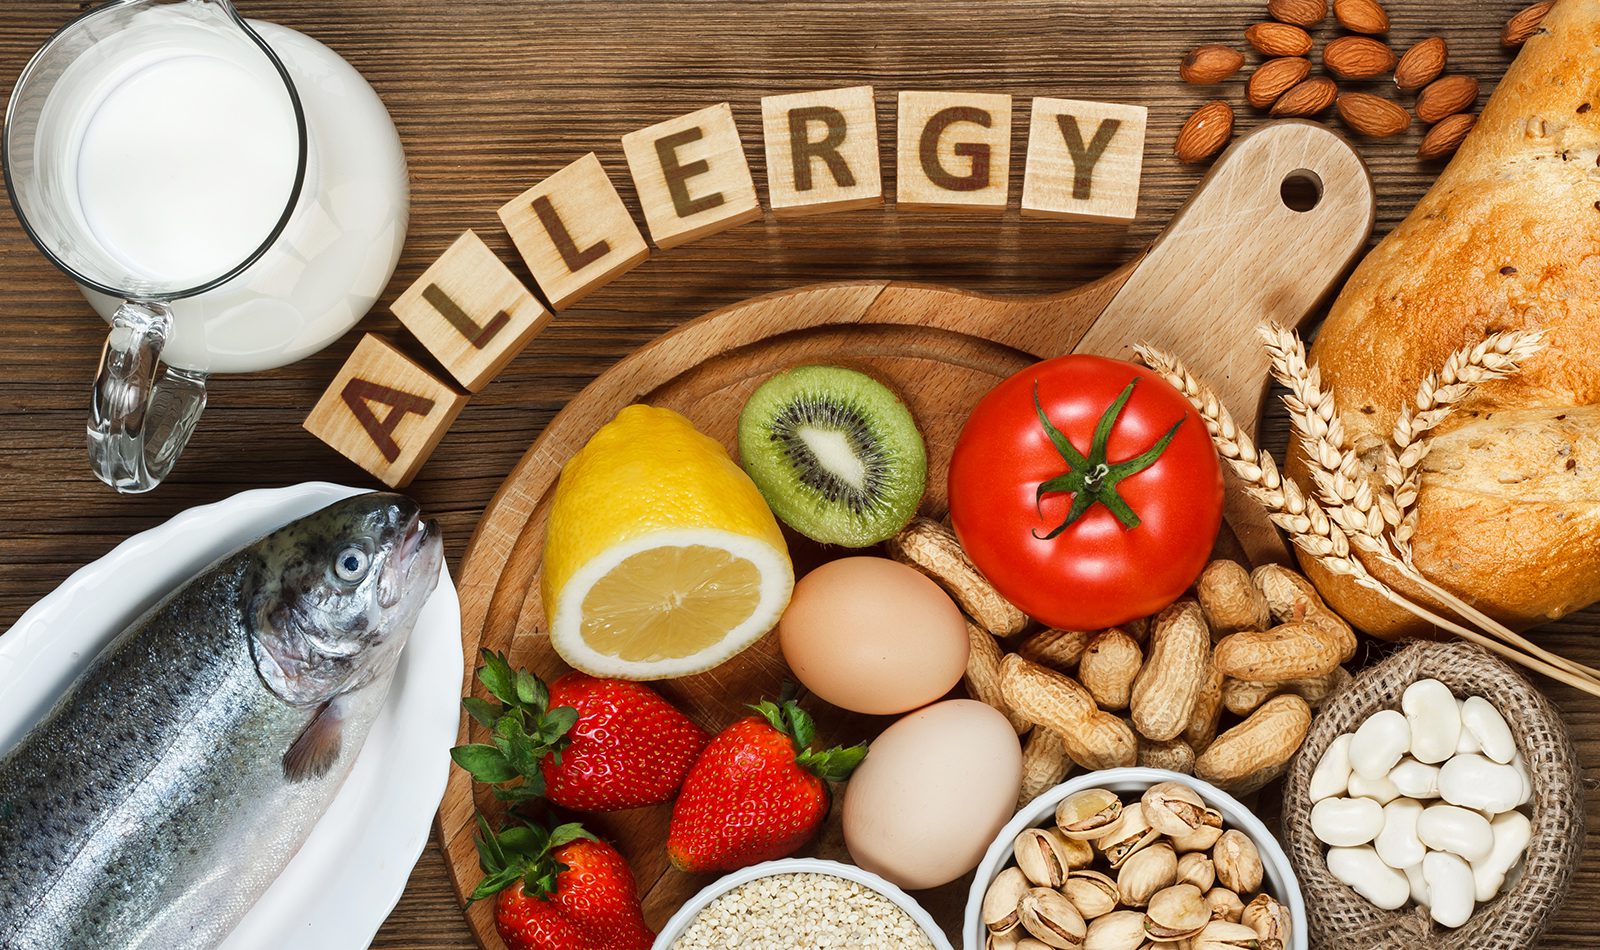 Decorative image for our Allergen Awareness online course